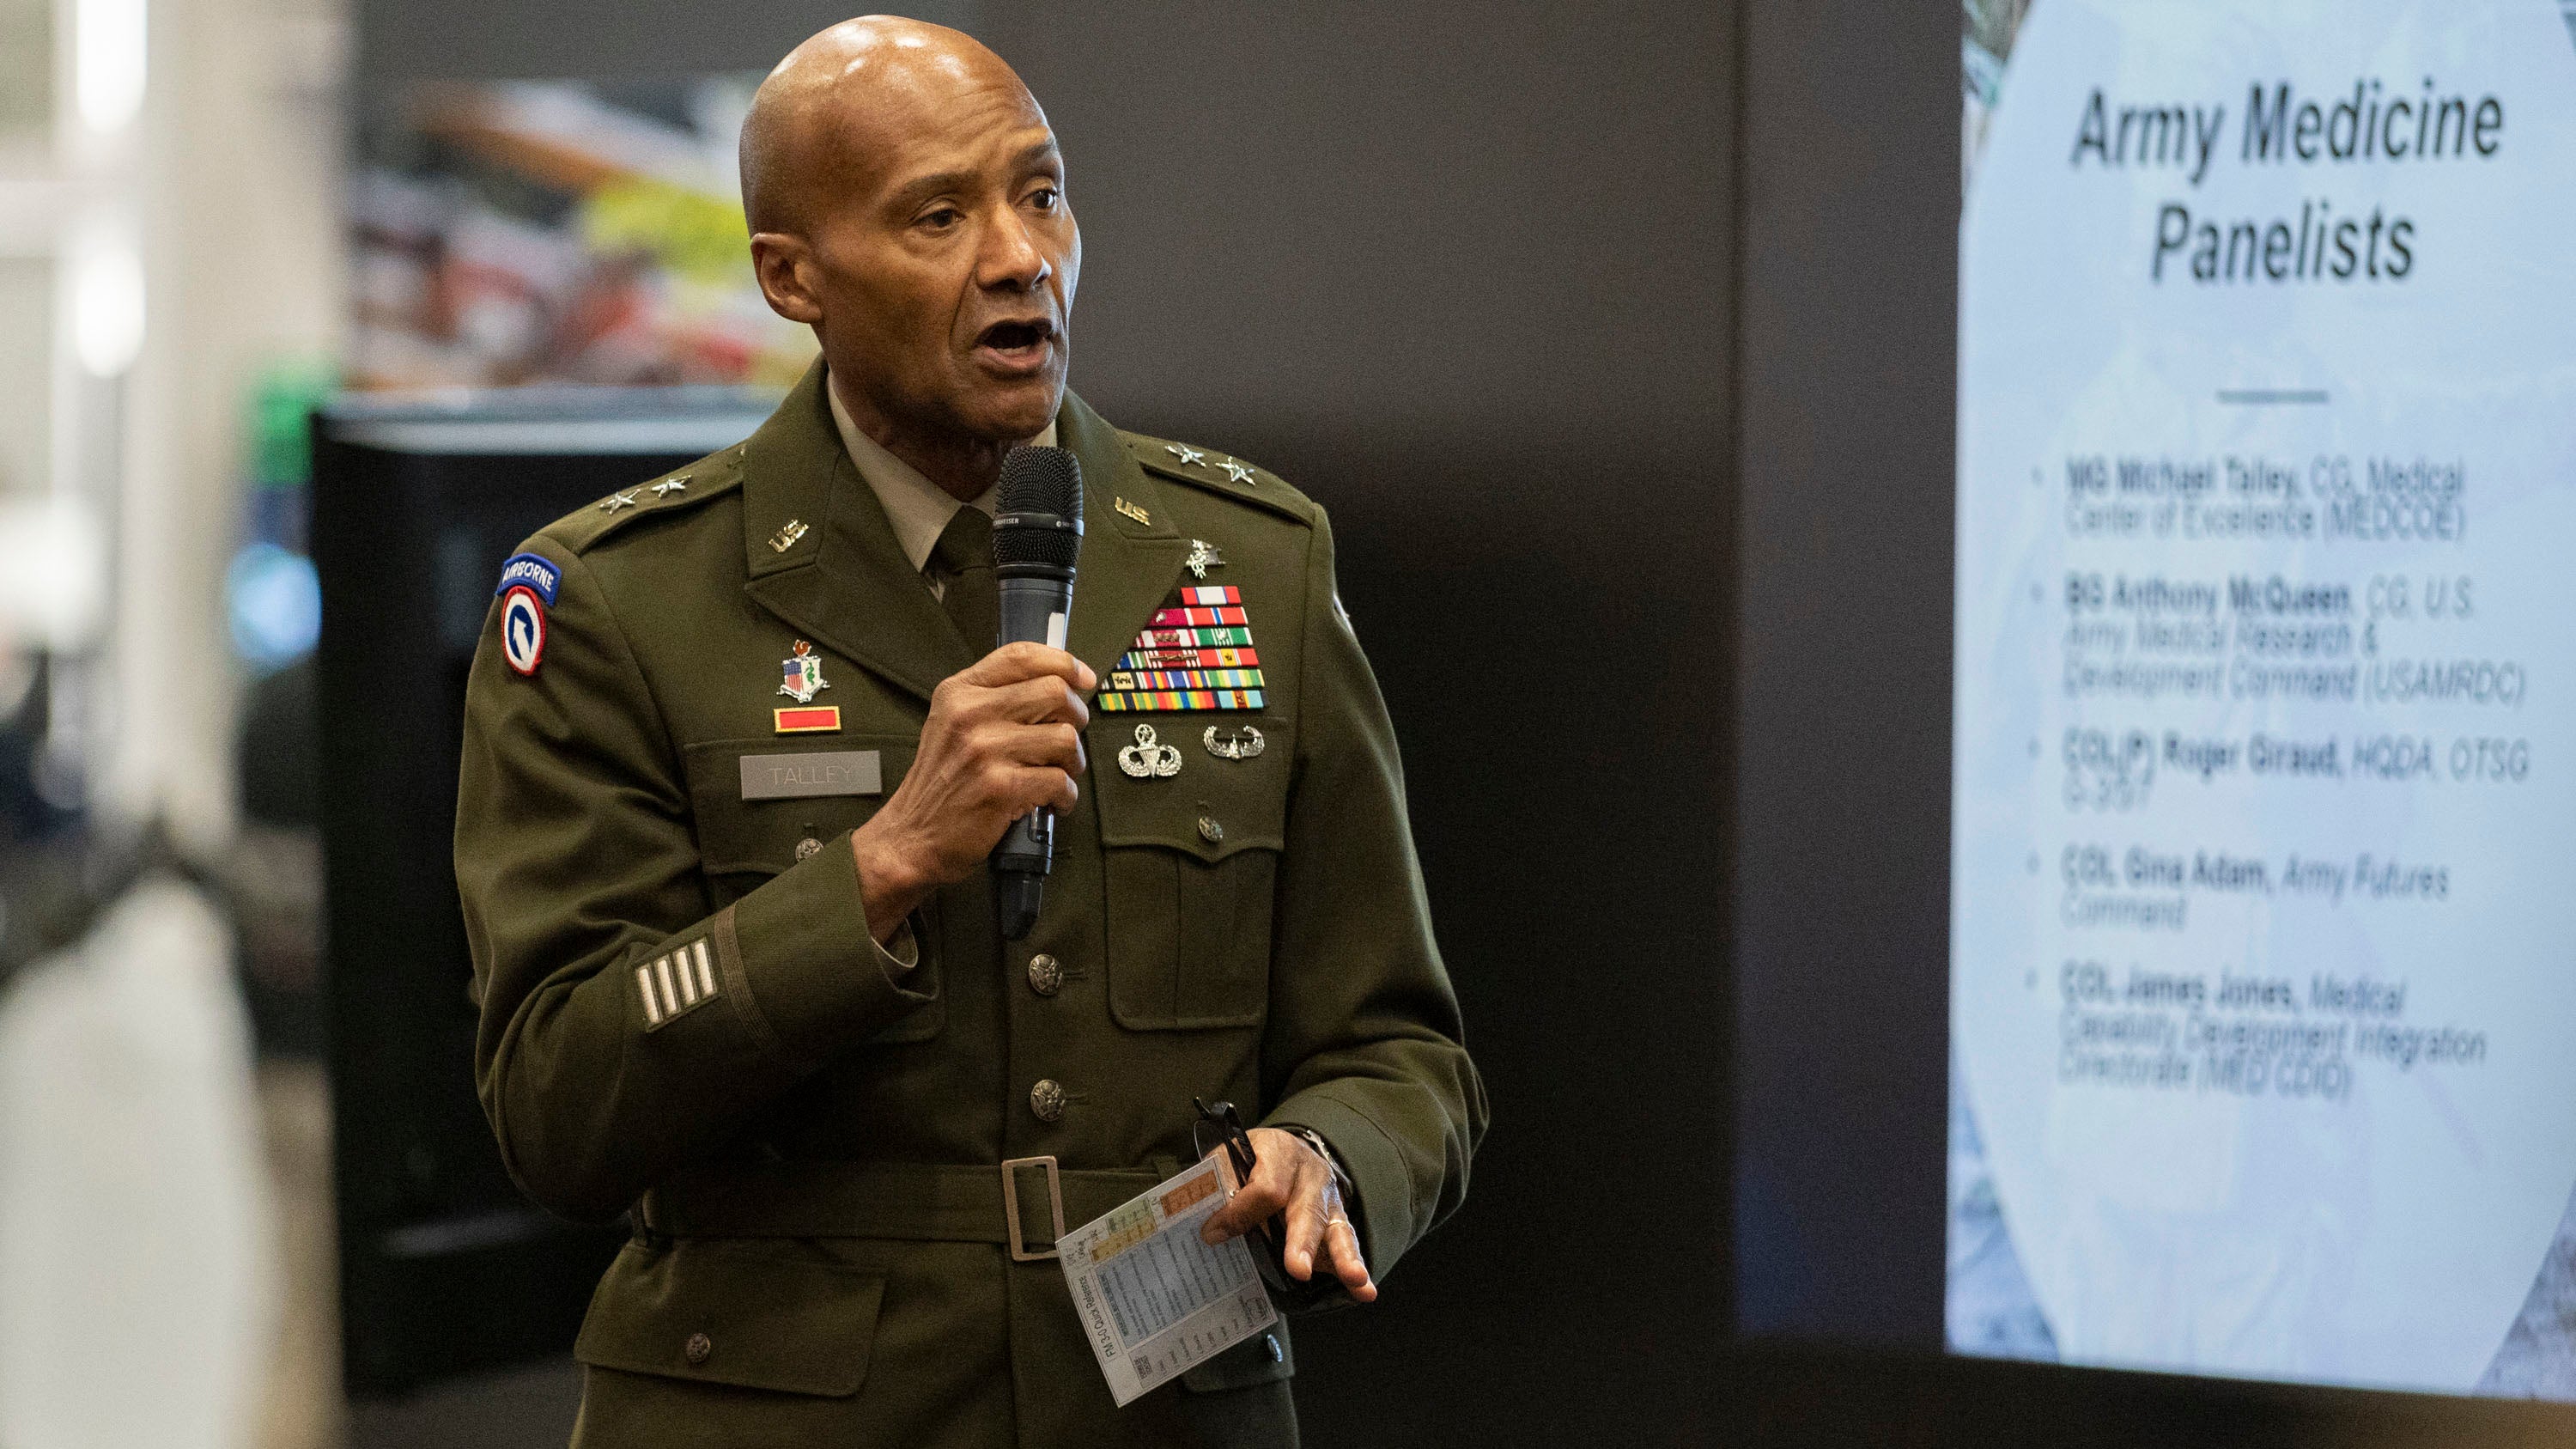 Maj. Gen. Michael J. Talley, Commanding General of the United States Army Medical Center of Excellence, speaks during the Warriors Corner at AUSA 2022 Annual Meeting in Washington, D.C., Tuesday, Oct. 11, 2022. (Jeromie Stephens for AUSA)